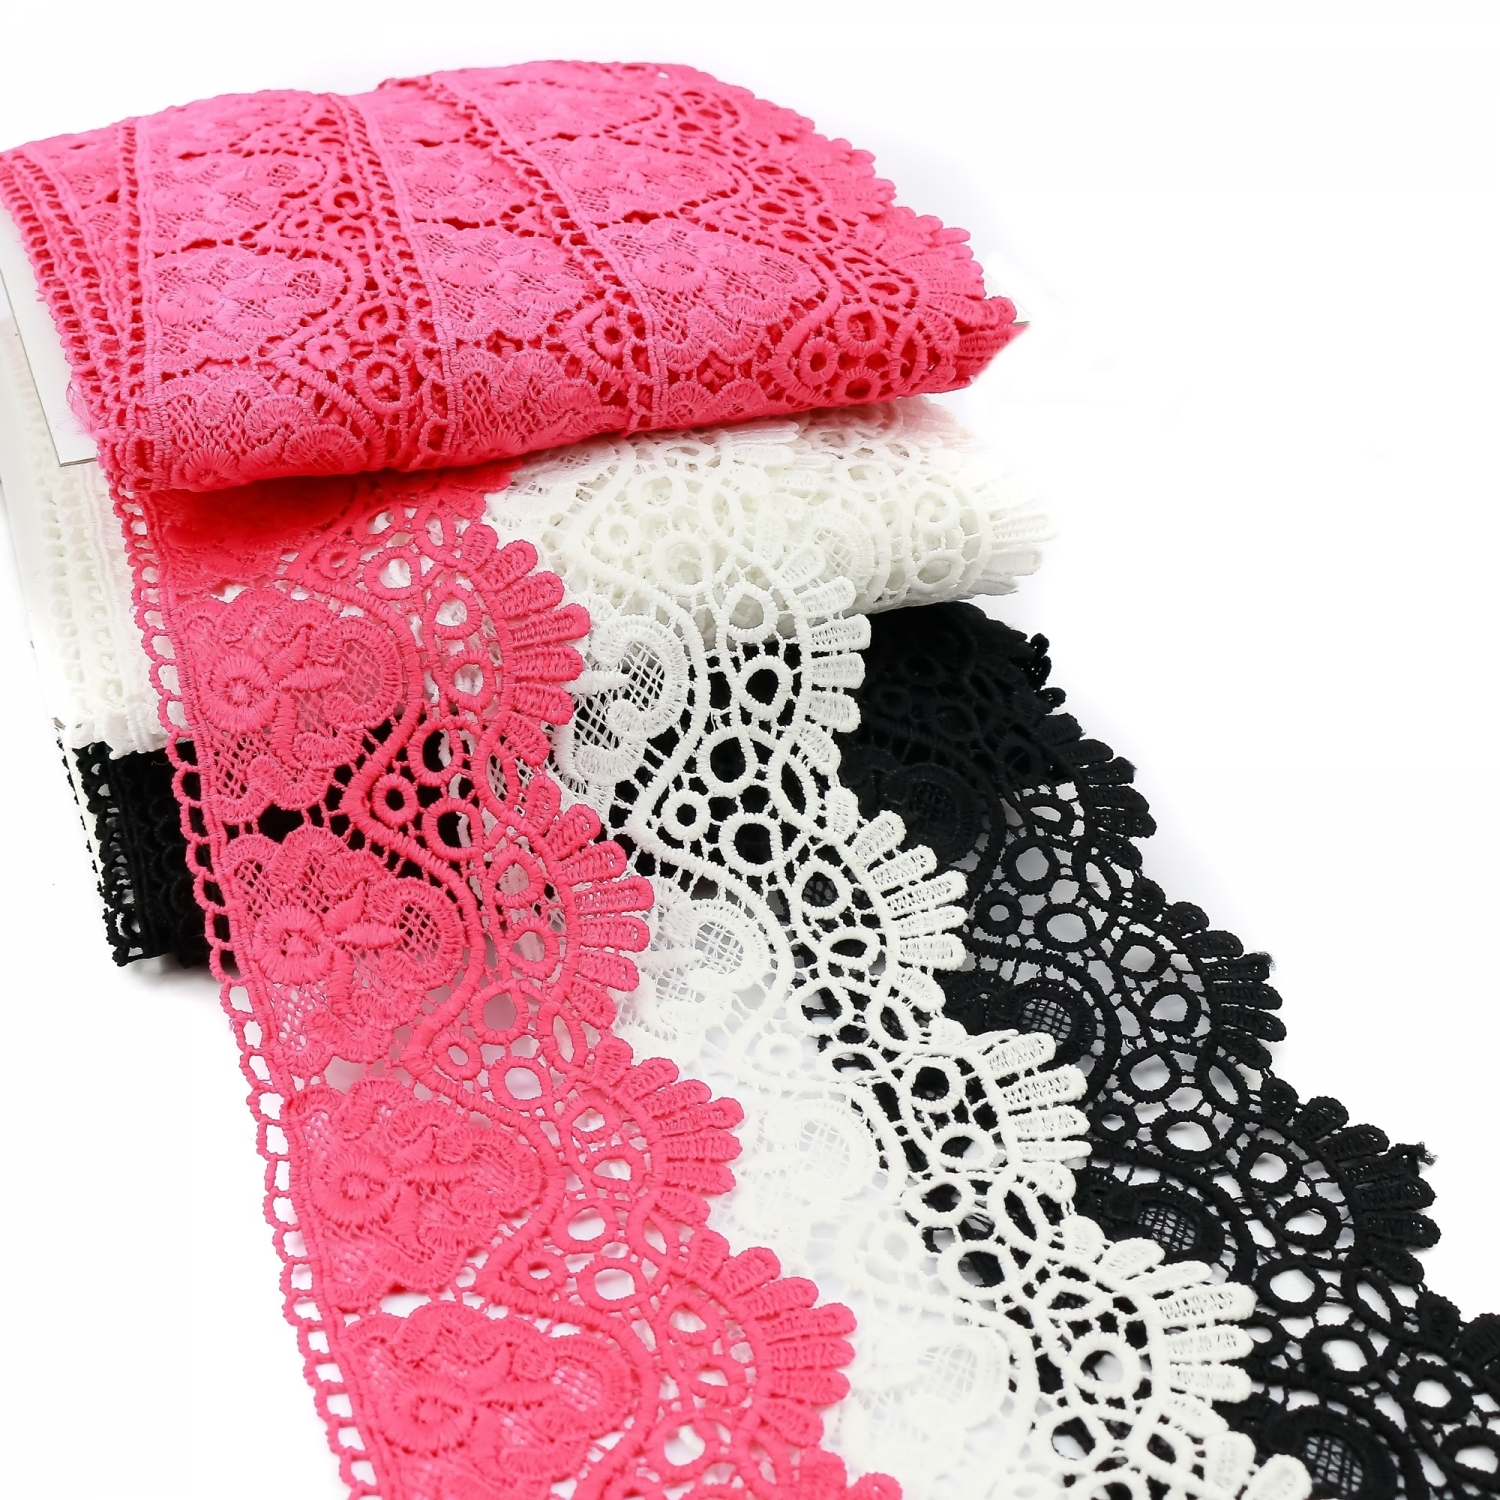 Border Lace Embroidered, width 9 cm (13.72 meters/roll)Code: HX115